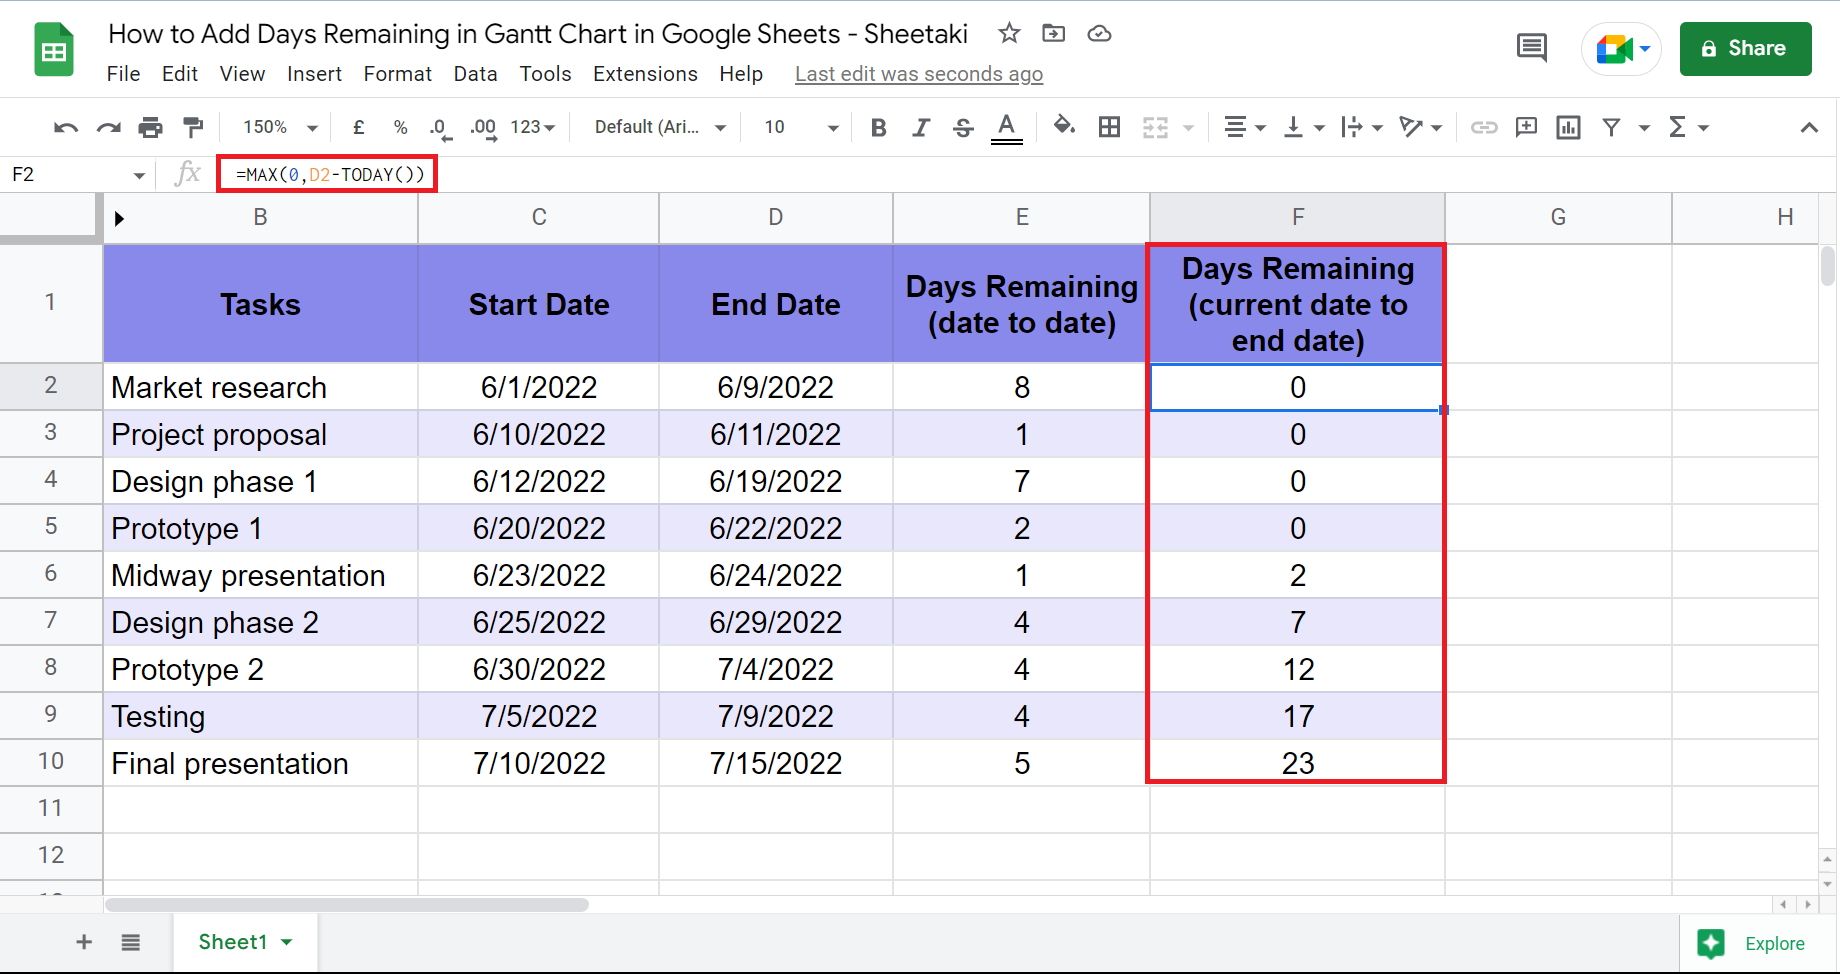 Add Days Remaining in Gantt Chart in Google Sheets